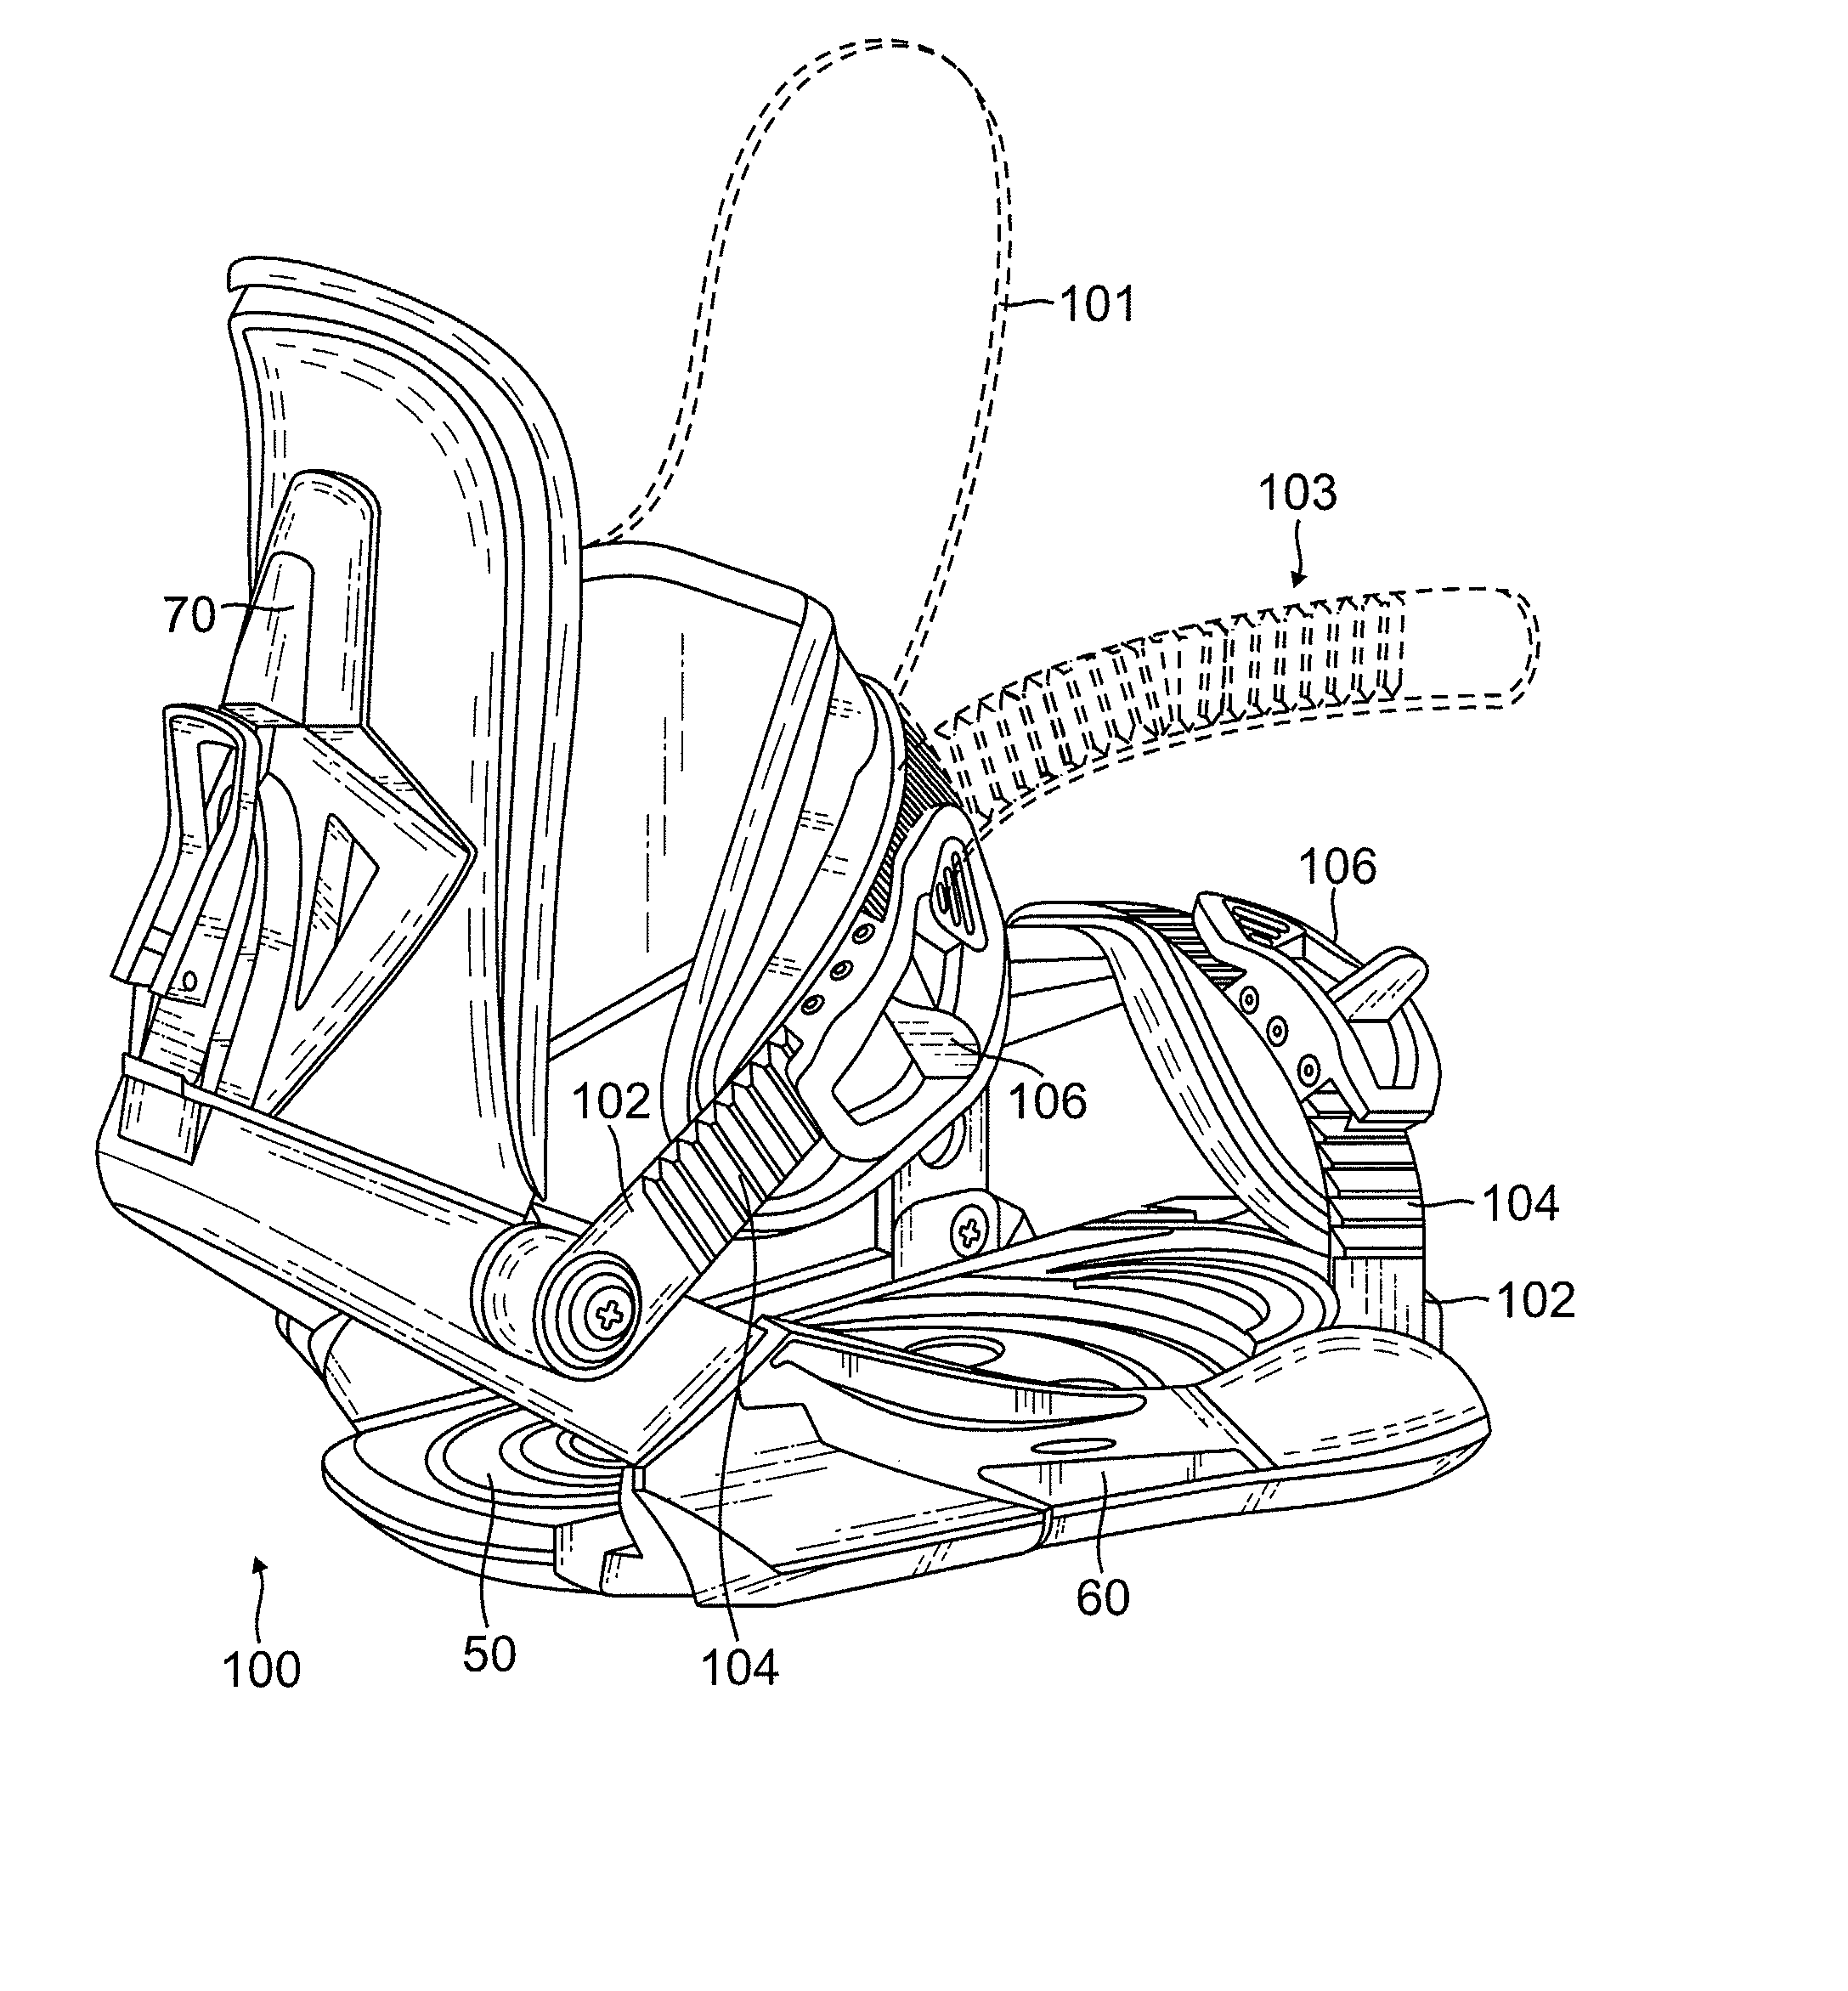 Reformable closure device strap